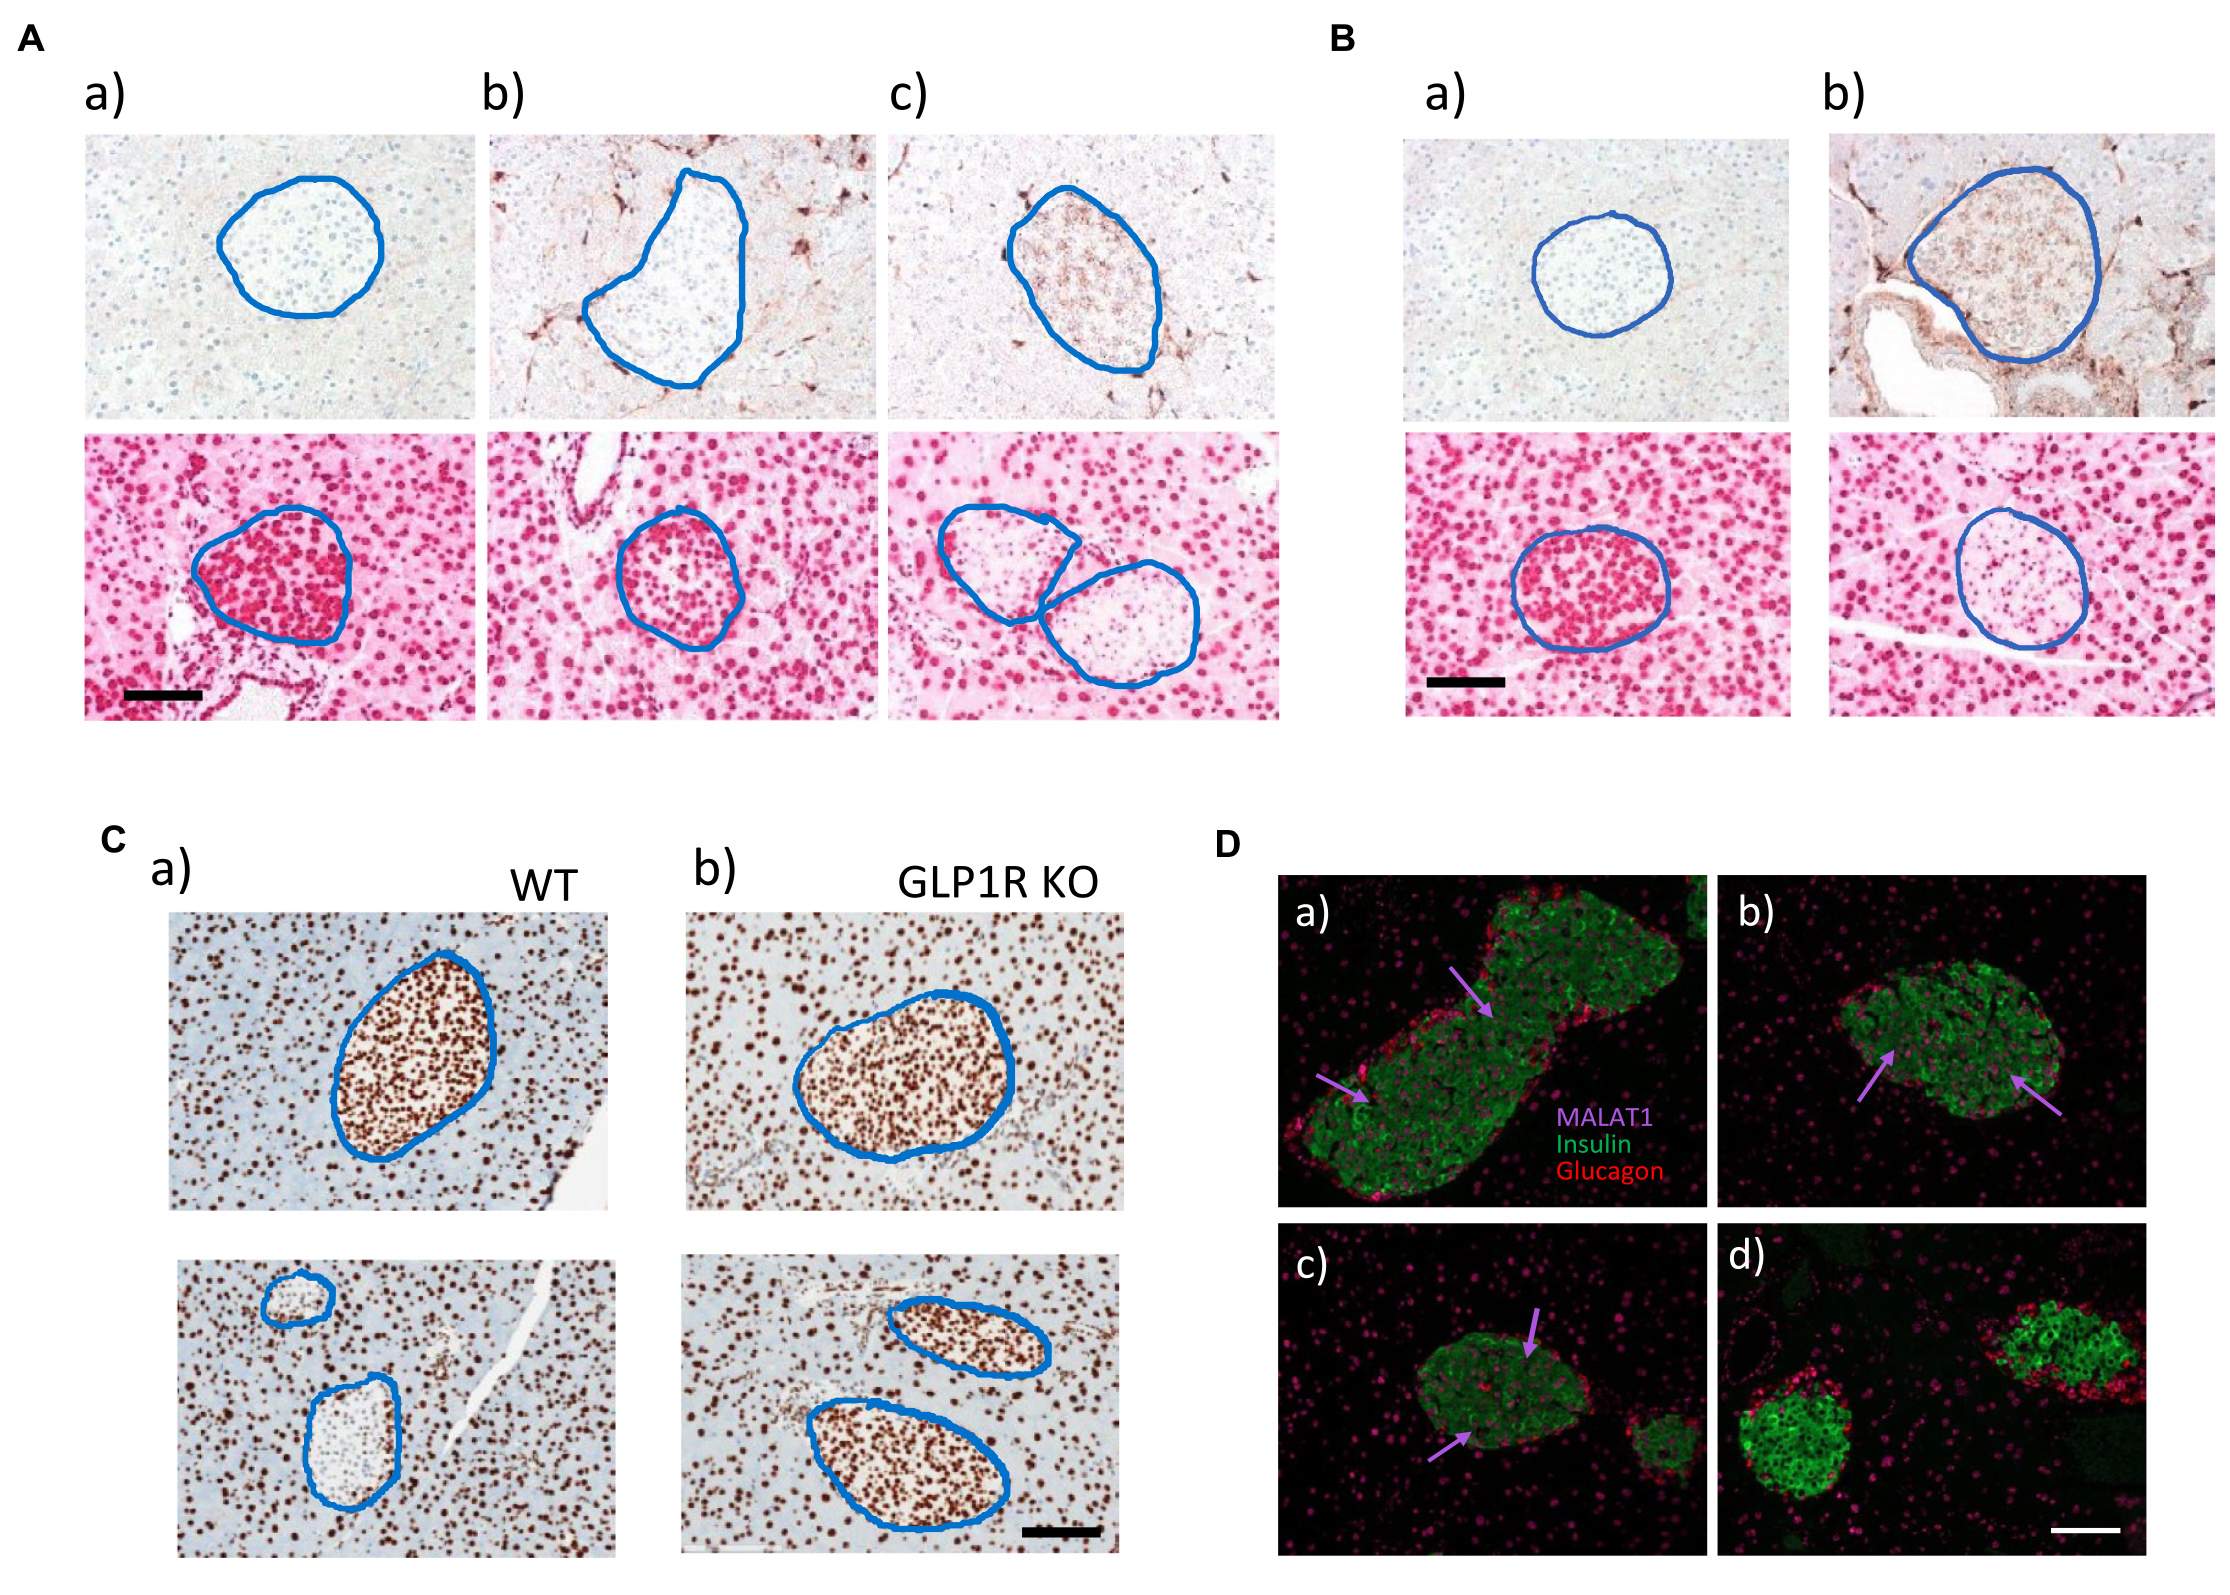 GLP1R-dependent uptake of ASO and knockdown of gene expression in mice treated with eGLP1-ASO conjugates in vivo. (A) Representative pancreatic sections stained for ASO by IHC and MALAT1 RNA by ISH from mice treated for 2 weeks with three subcutaneous injections of (a) saline, (b) MALAT1-ASO (1 µmol/kg), or (c) eGLP1-MALAT1-ASO (1 µmol/kg). (B) ASO uptake by IHC and MALAT1 RNA levels by ISH in pancreatic sections from mice treated for 2 weeks with three intravenous injections of (a) saline or (b) eGLP1-MALAT1-ASO (1 µmol/kg). (C) MALAT1 gene expression by ISH in (a) wild-type (WT) and (b) GLP1R knockout (KO) mice 72 hours after a single subcutaneous dose of saline or eGLP1-MALAT1-ASO (1 µmol/kg). (D) Pancreatic section from wild-type mice stained using fluorescence in situ probes for MALAT1 (purple, arrows), insulin (green), and glucagon (red). Pancreatic sections were collected 72 hours after one subcutaneous administration of (a) saline or (b) MALAT1-ASO and (c) eGLP1-control-ASO or (d) eGLP1-MALAT1-ASO, and all compounds were dosed at 1 µmol/kg. Scale bars, 200 µm. Islets are circled in blue in (A) to (C).   Credit: Ämmälä et al., Sci. Adv. 2018; 4 : eaat3386